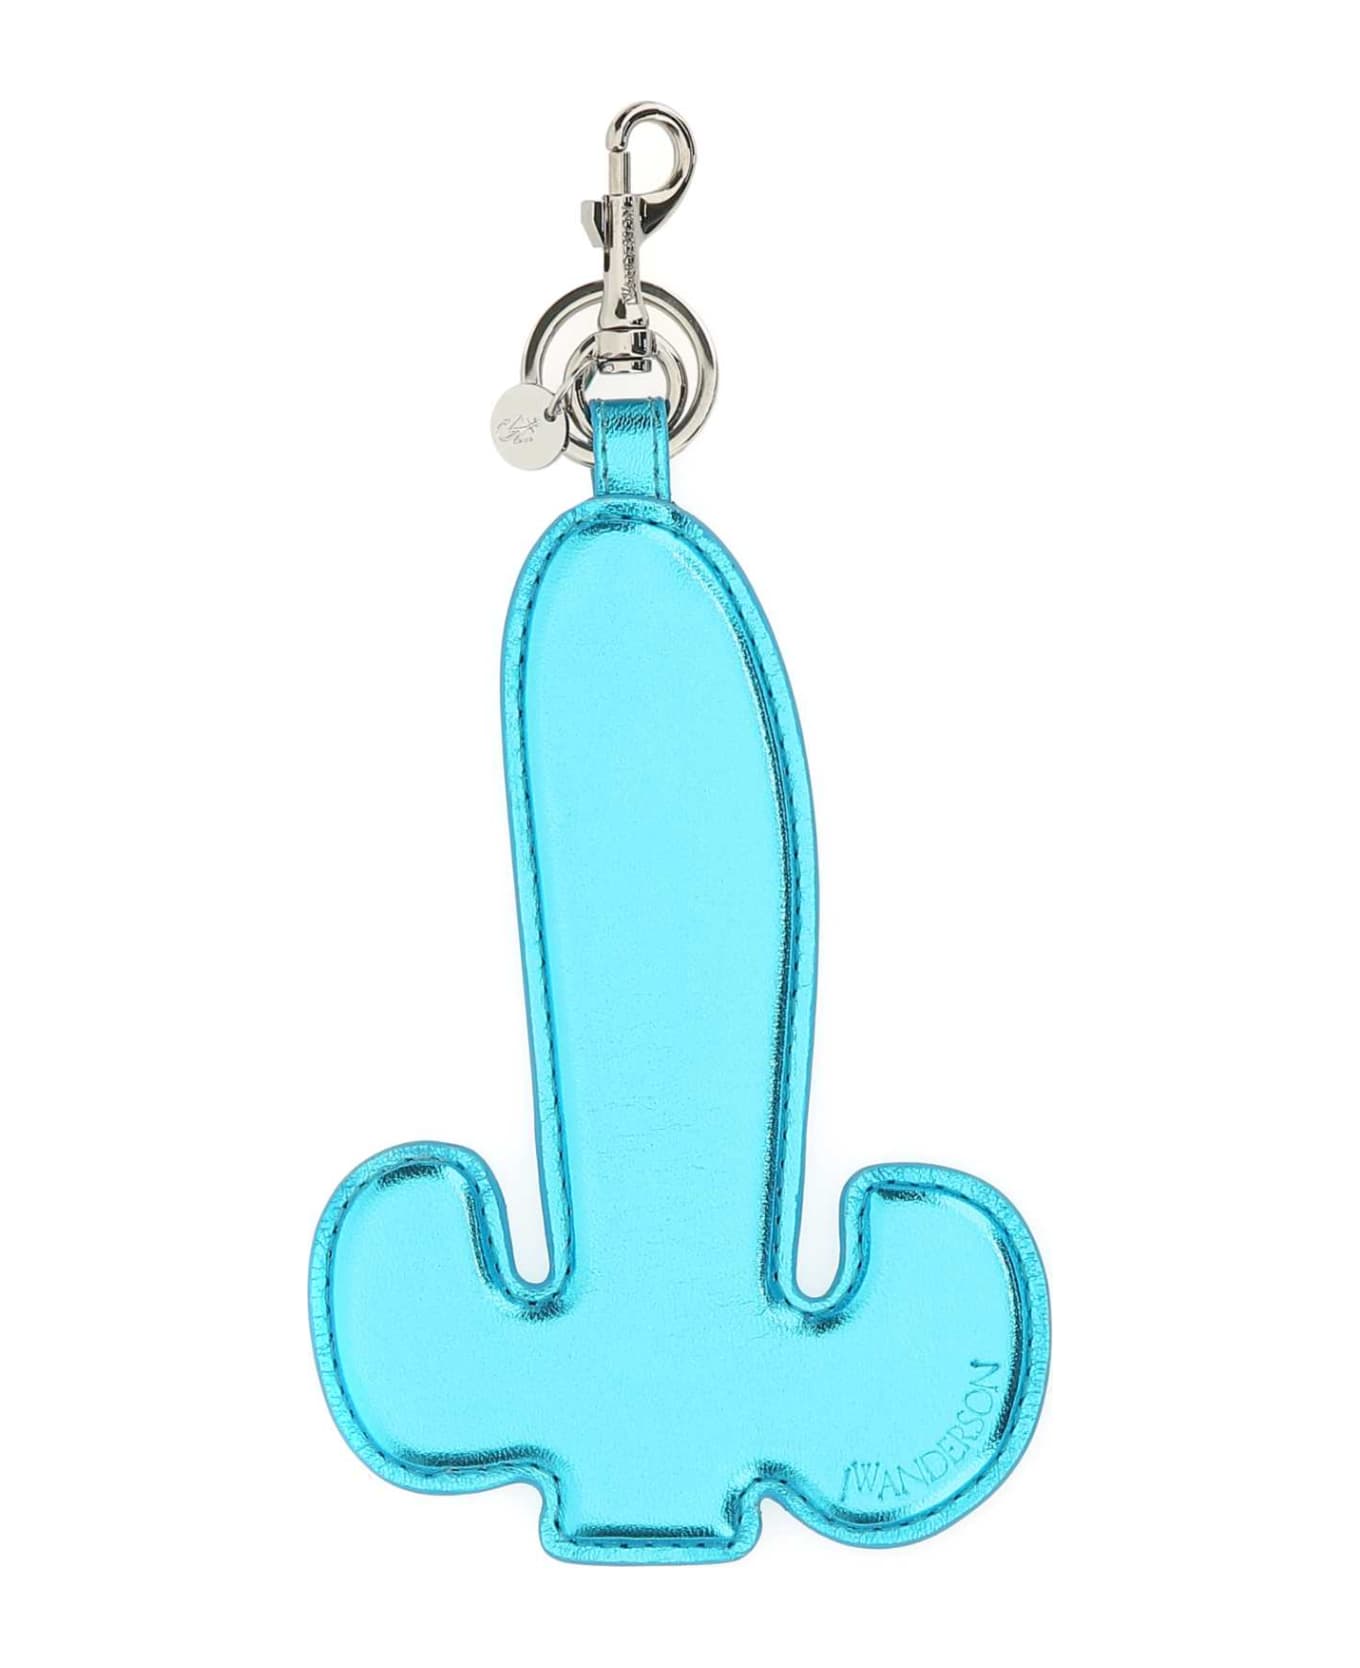 J.W. Anderson Light Blue Leather Key Chain - 840